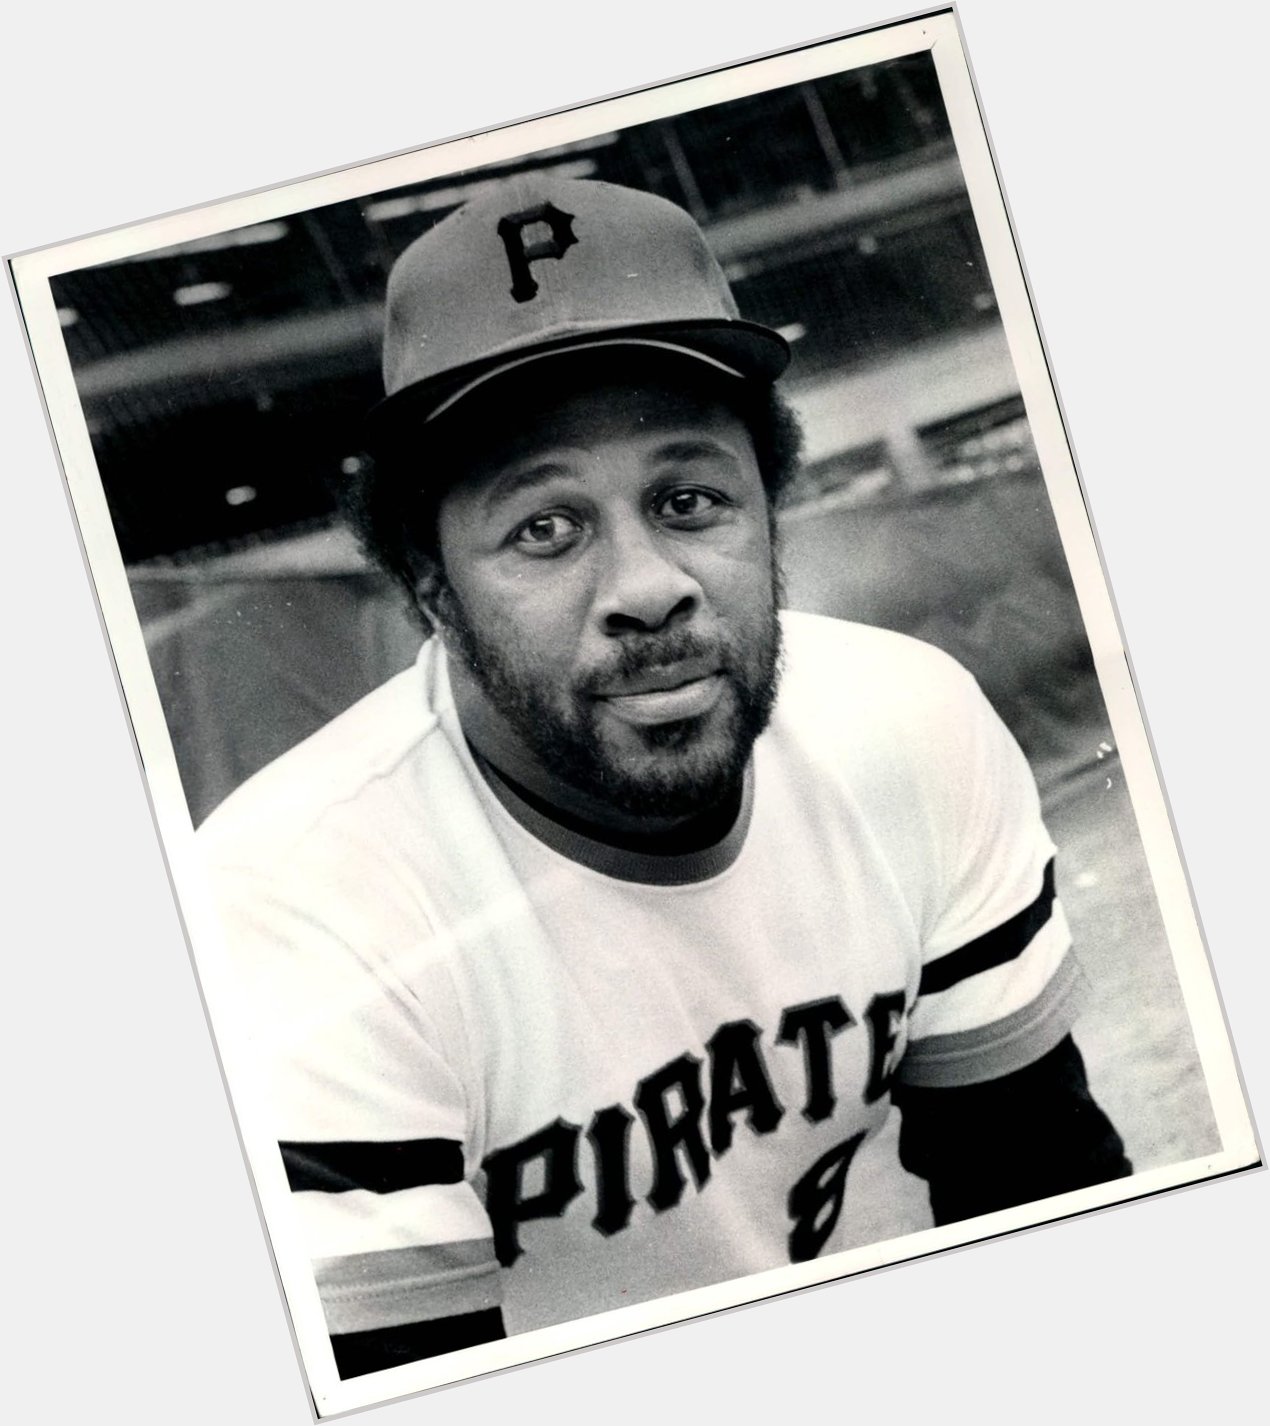 Happy birthday to Hall of Famer Willie Stargell! He would have been 77 today. 